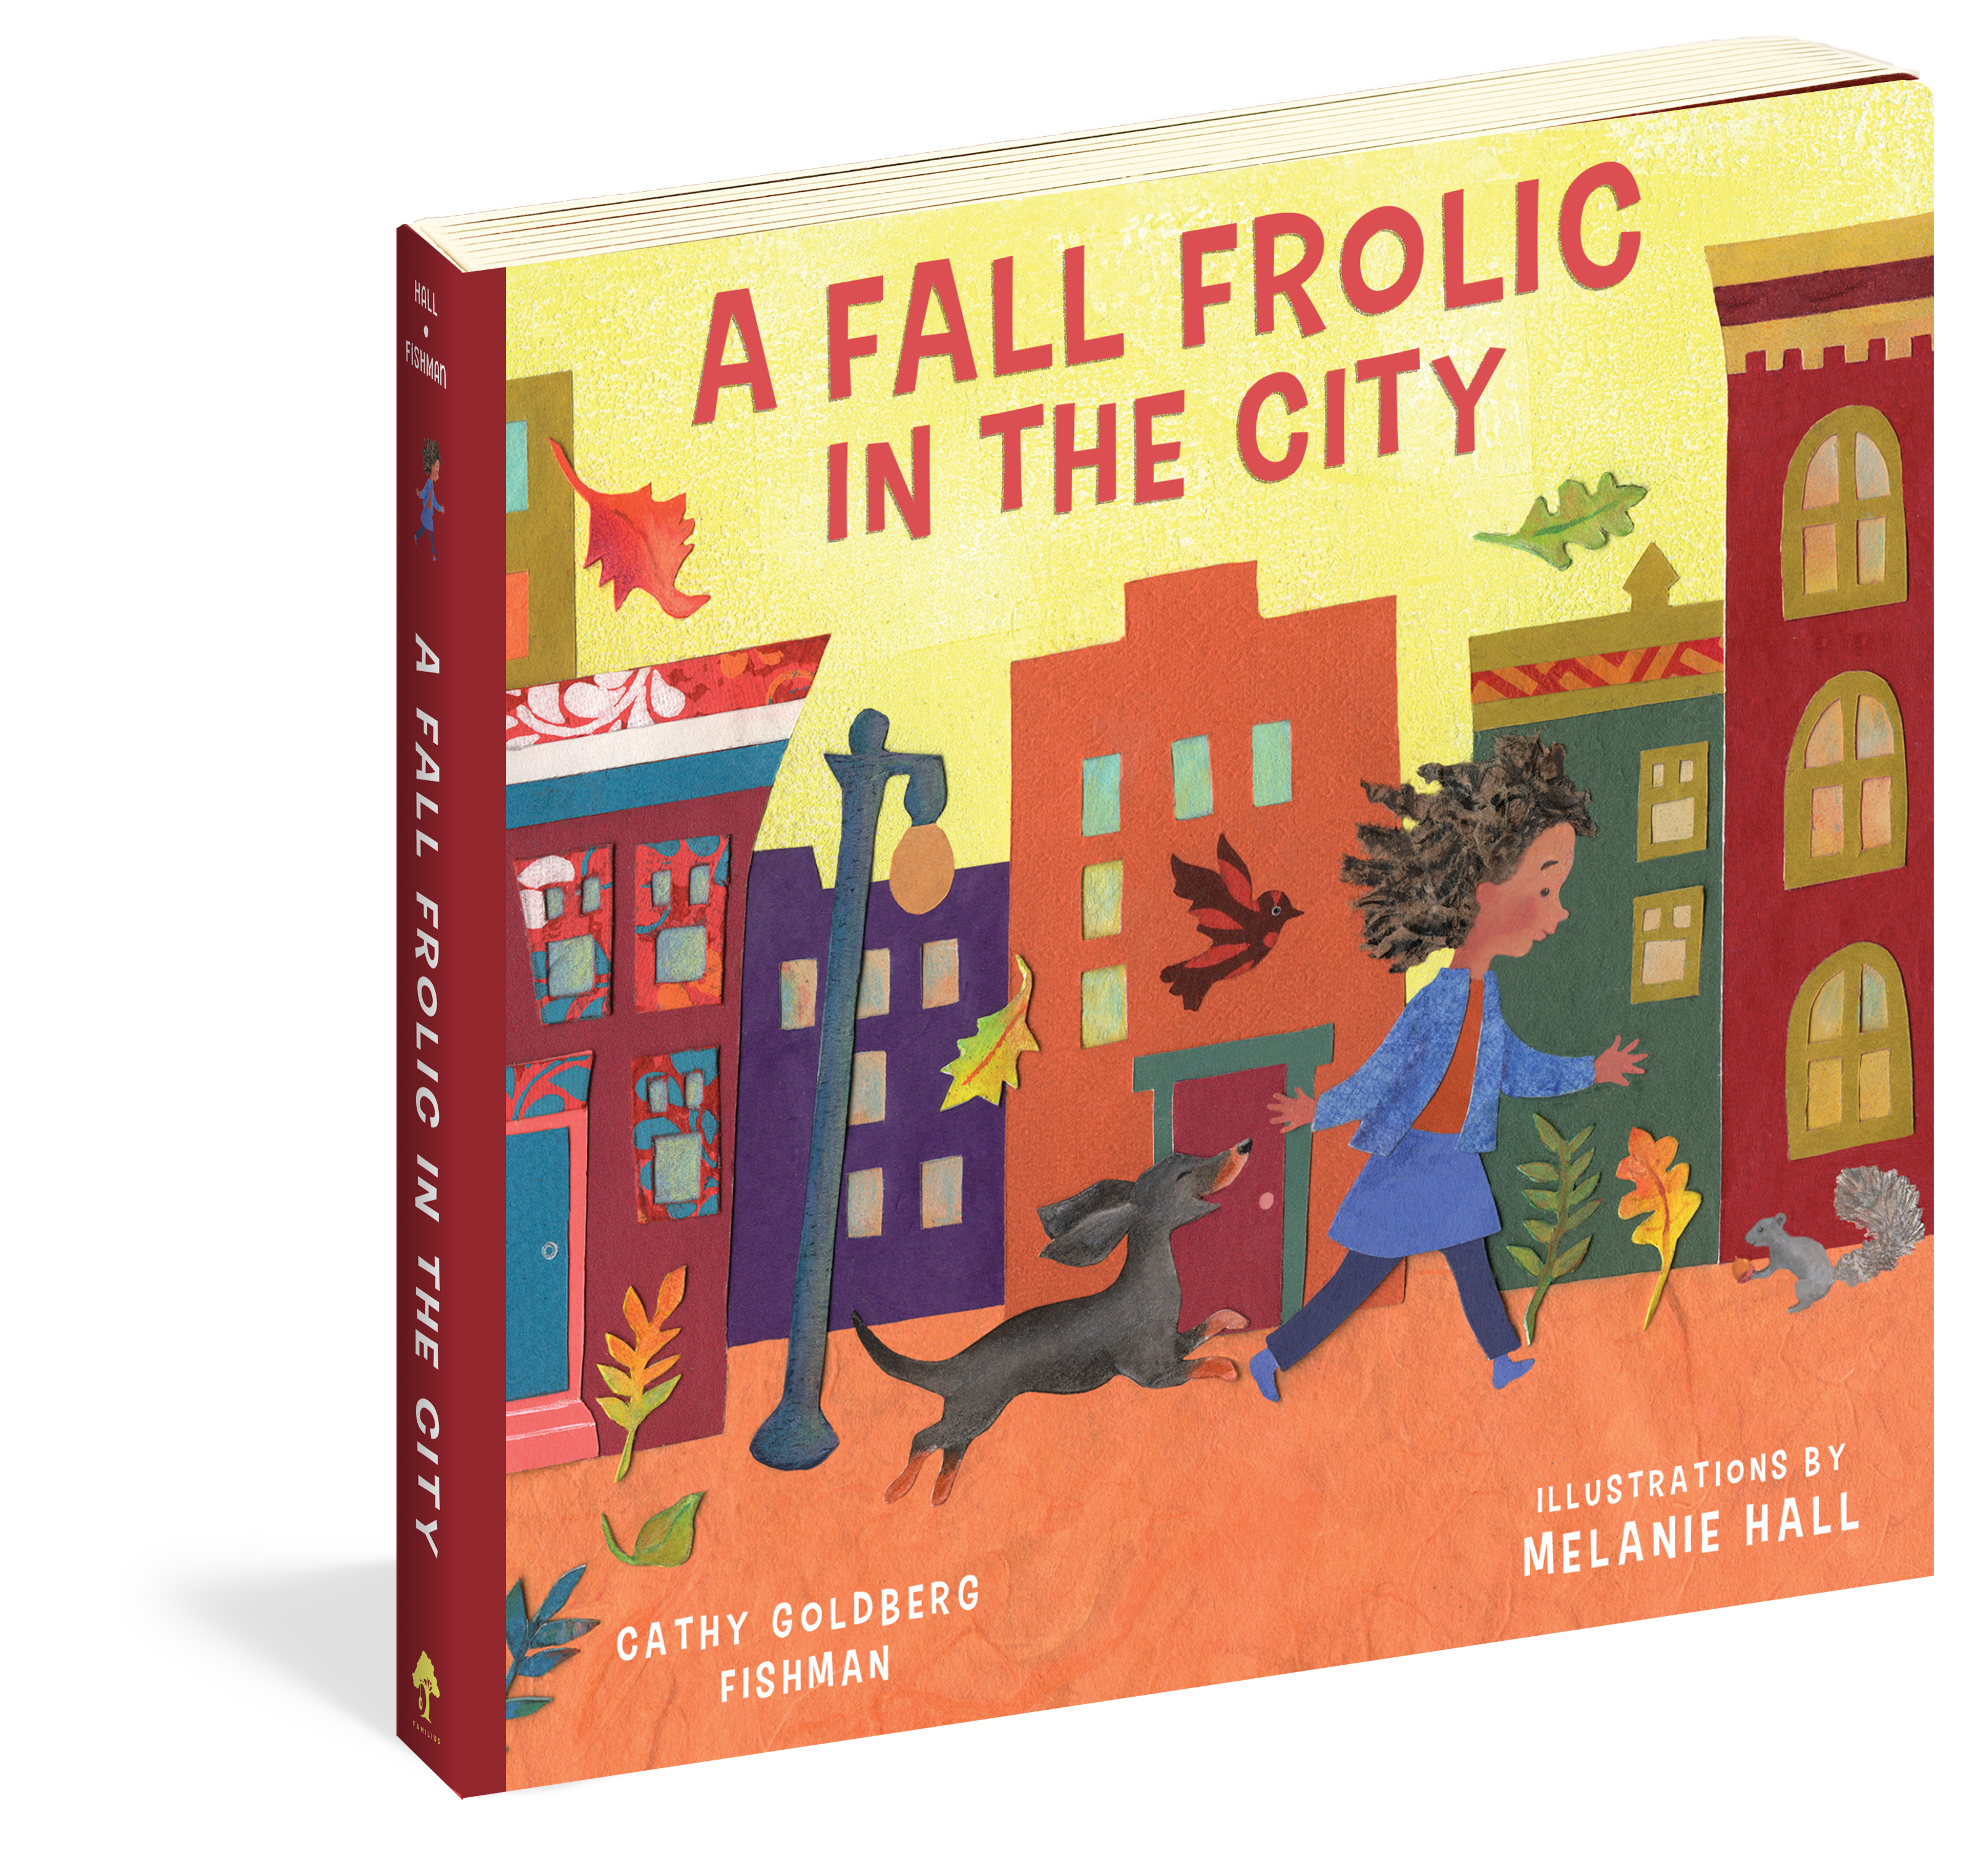 The cover of the board book Fall Frolic in the City